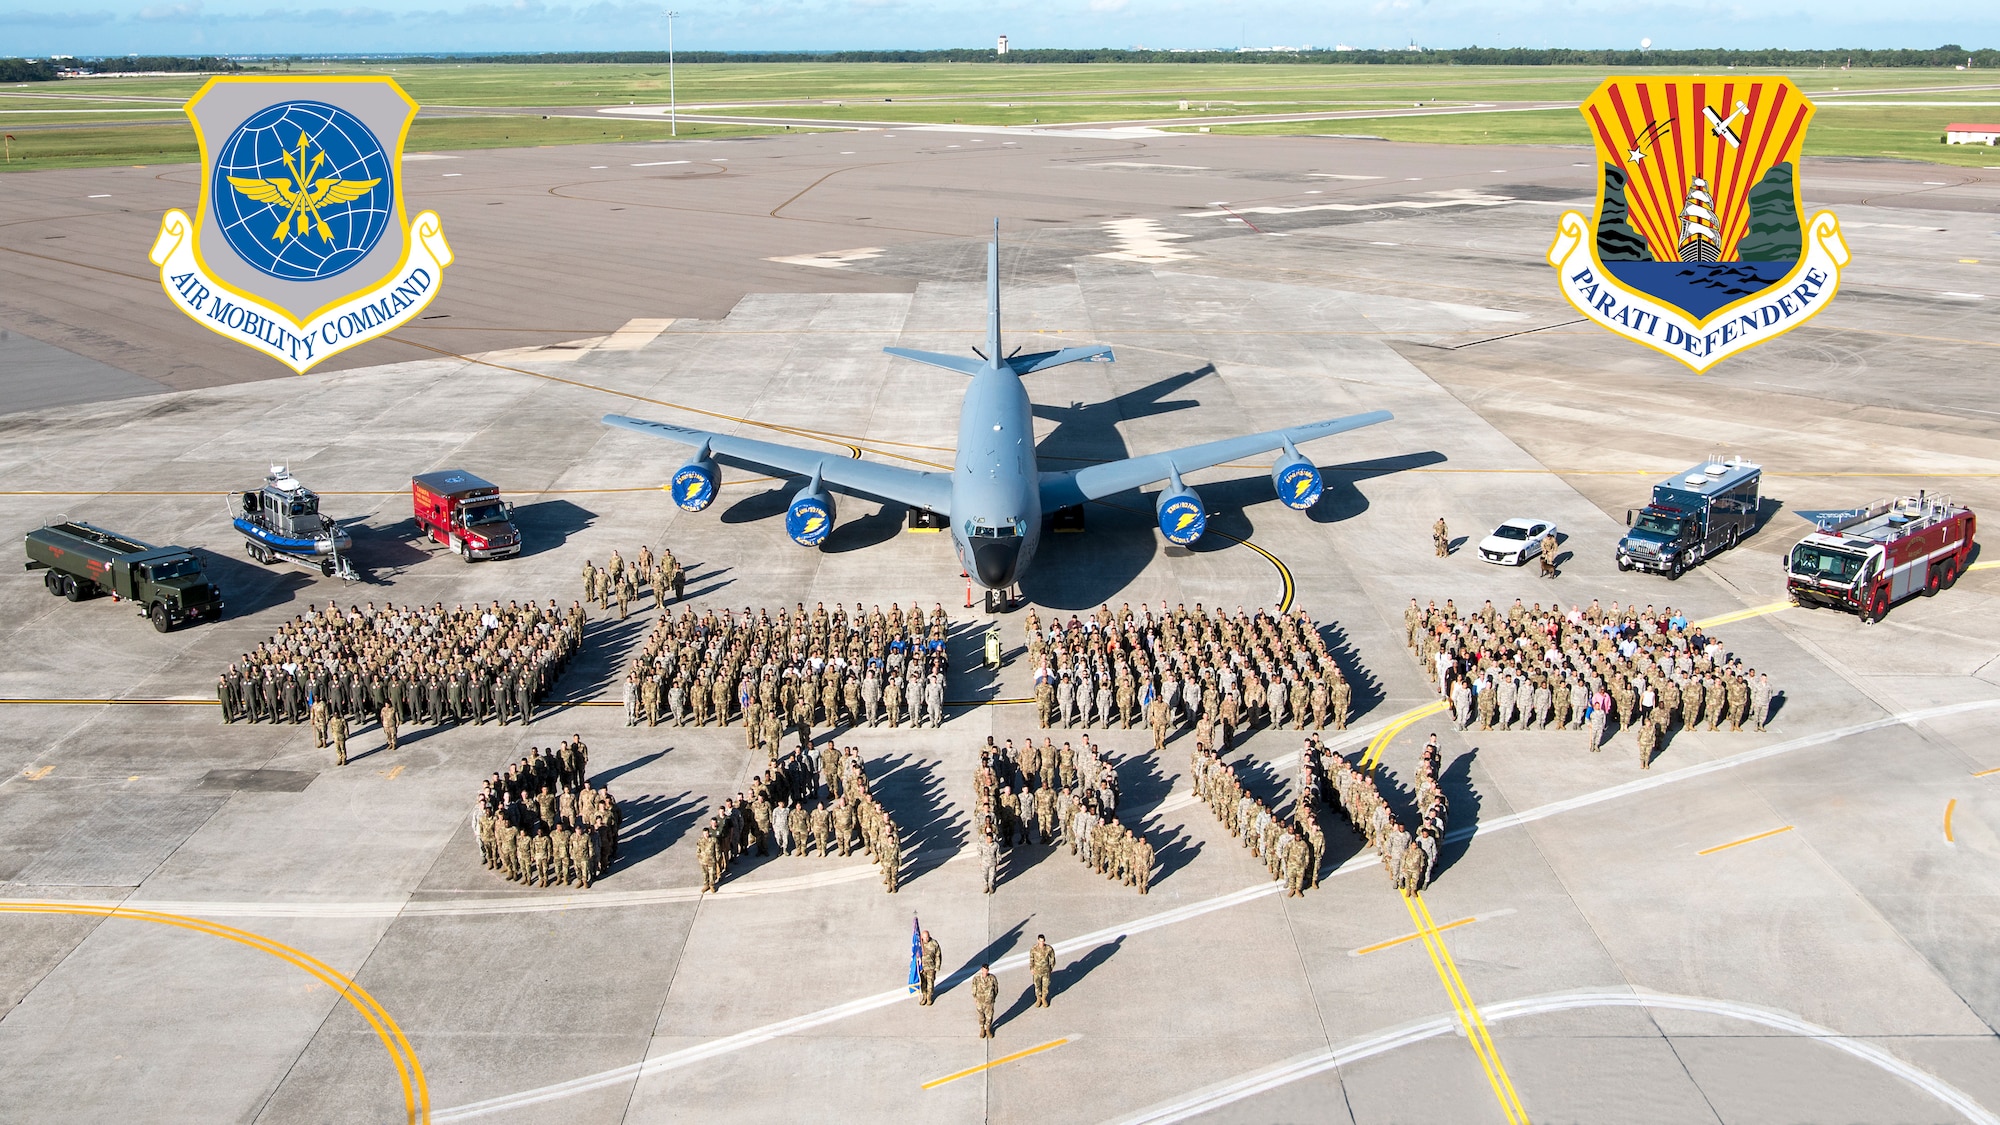 Personnel of the 6th Air Refueling Wing gather for a group photo at MacDill Air Force Base, Fla., Oct. 30, 2019.